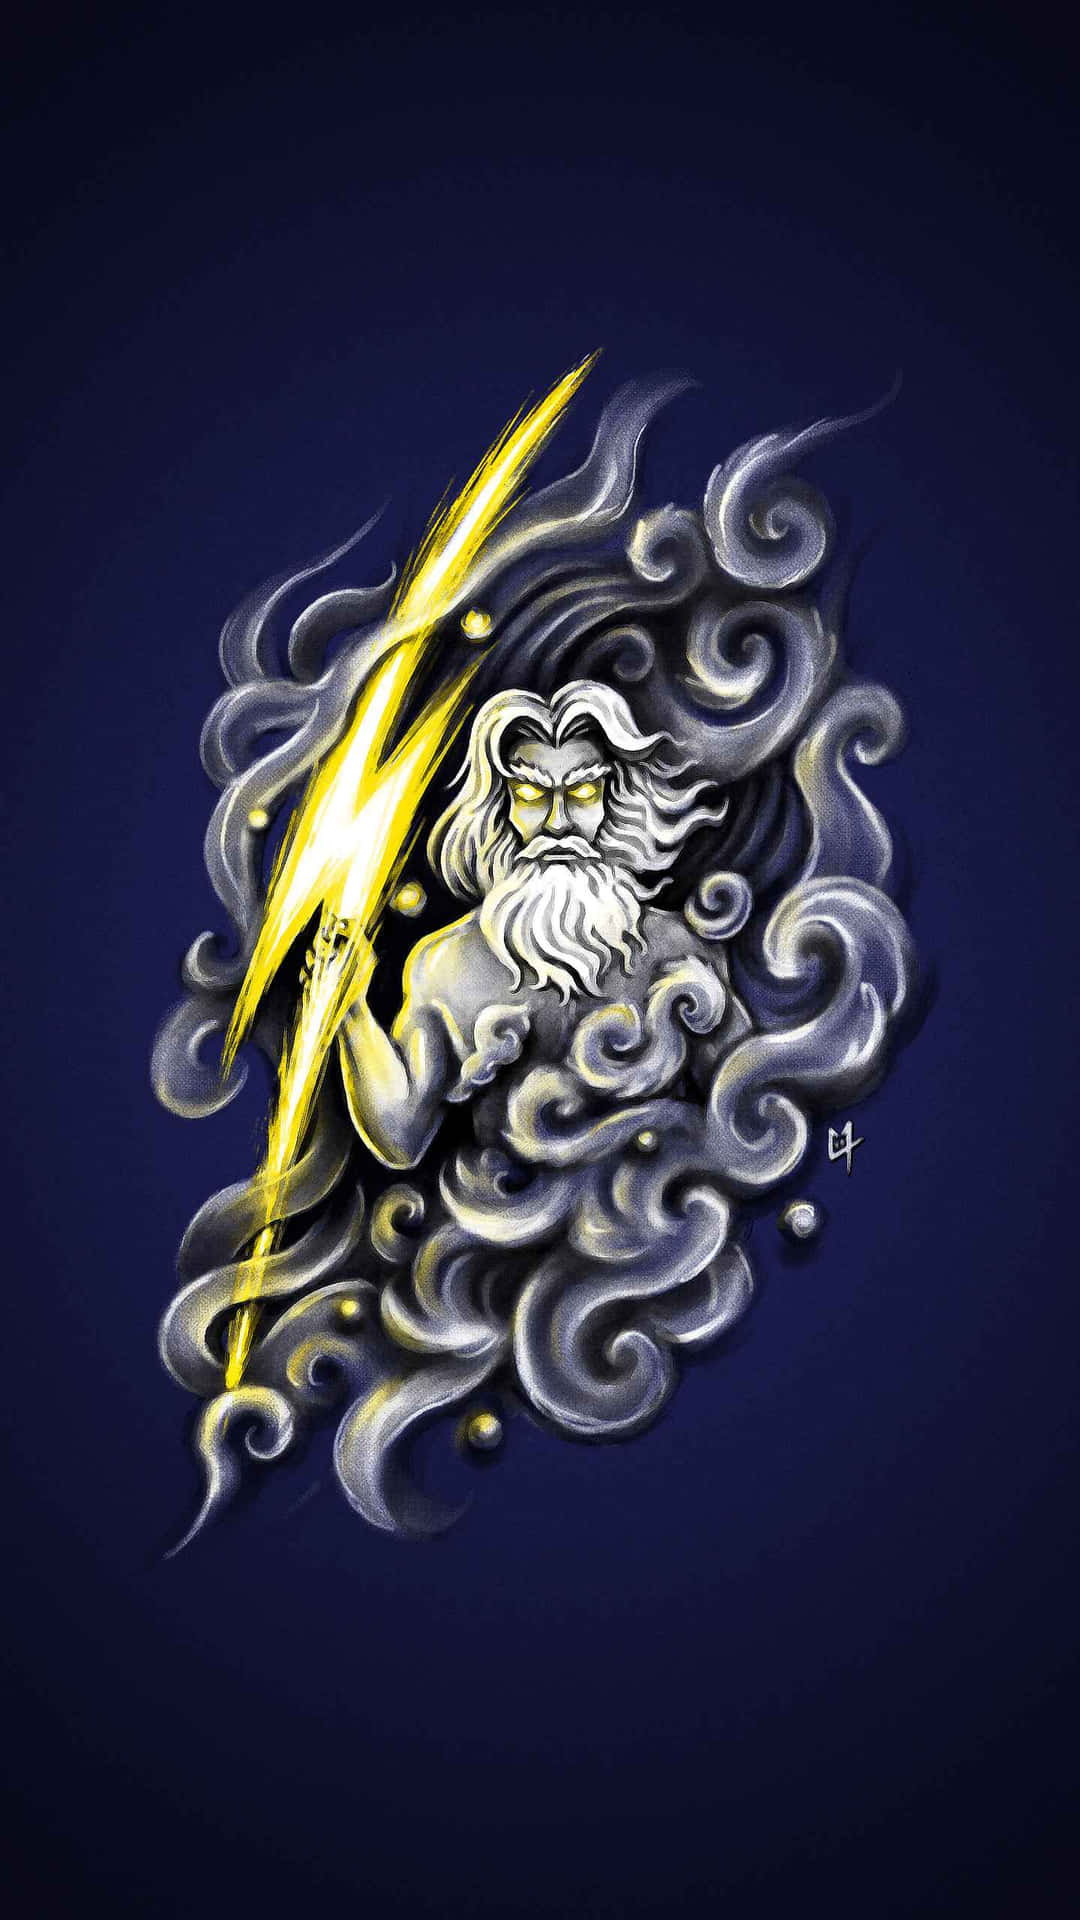 "Zeus - the Greek God of the Sky and Lightning" Wallpaper